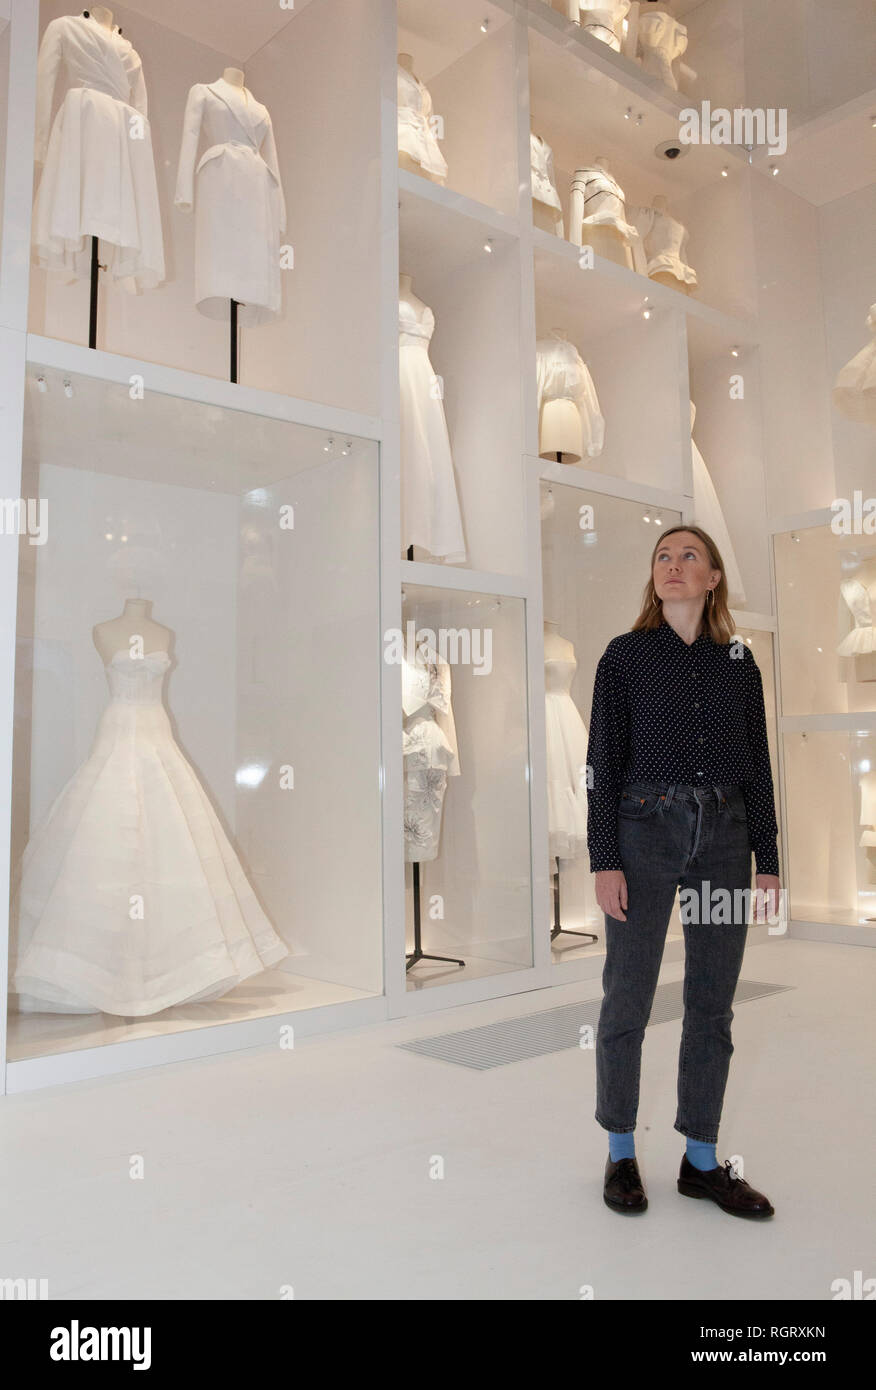 A room full of white voiles made for planning dress designs on show at the 'Christian Dior: Designer of Dreams' exhibition at the Victoria and Albert  Stock Photo